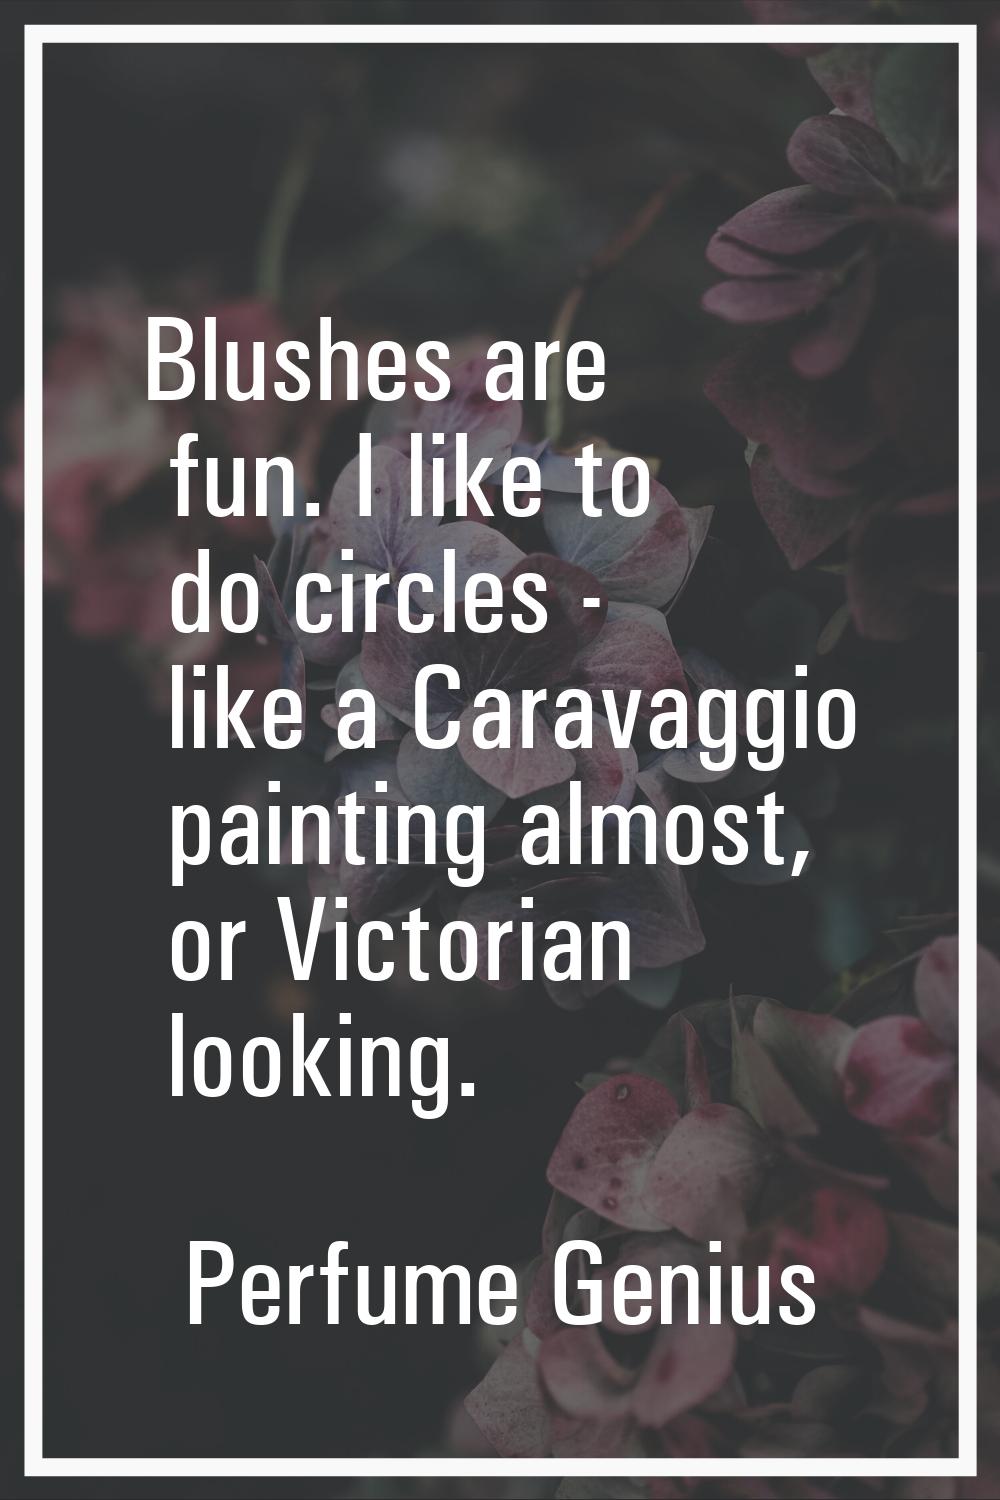 Blushes are fun. I like to do circles - like a Caravaggio painting almost, or Victorian looking.